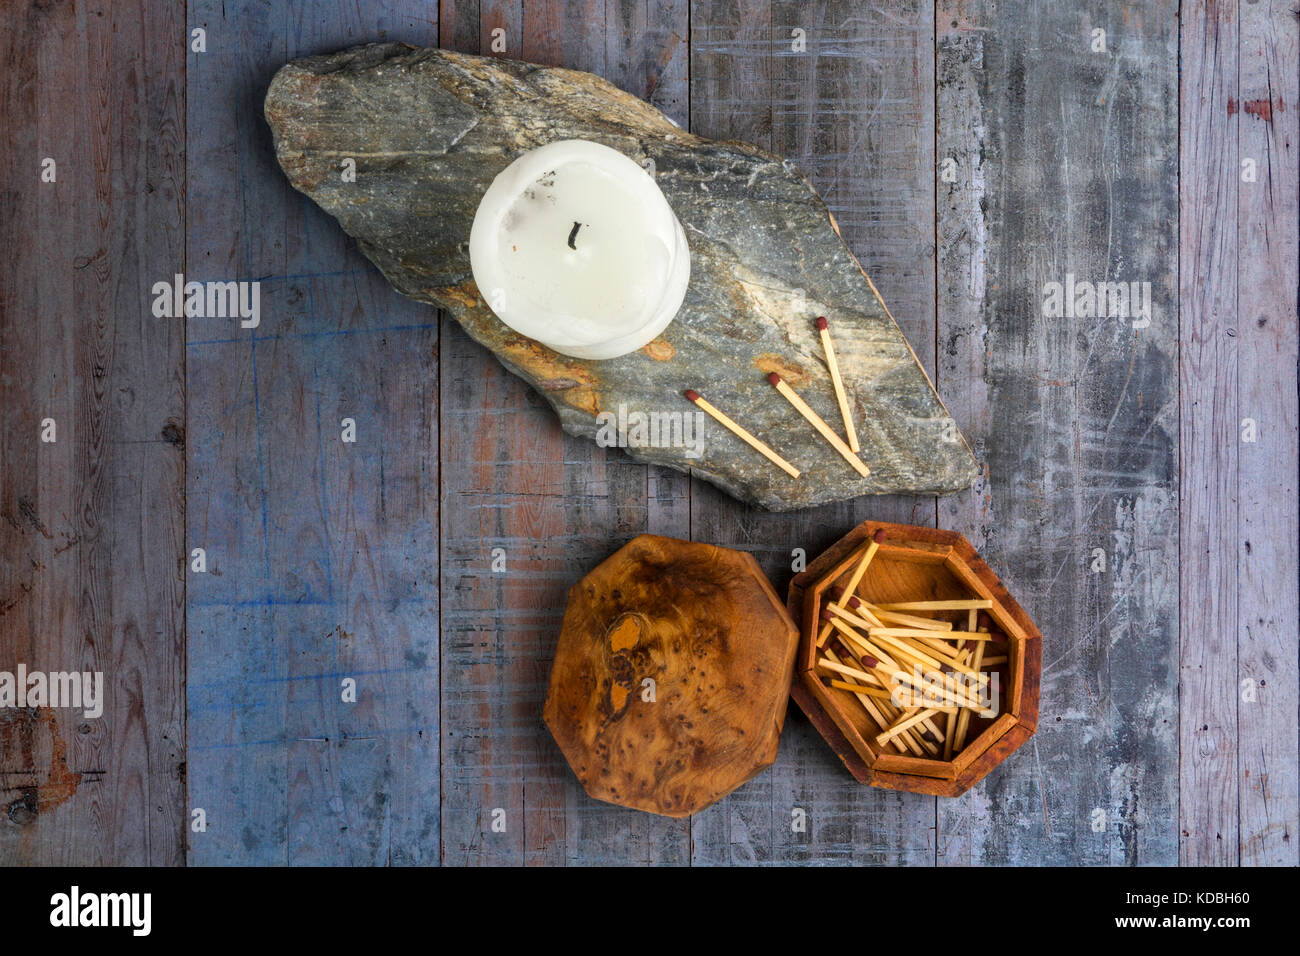 White church candle on a piece of slate with a wooden box of matches, on a wood plank background Stock Photo